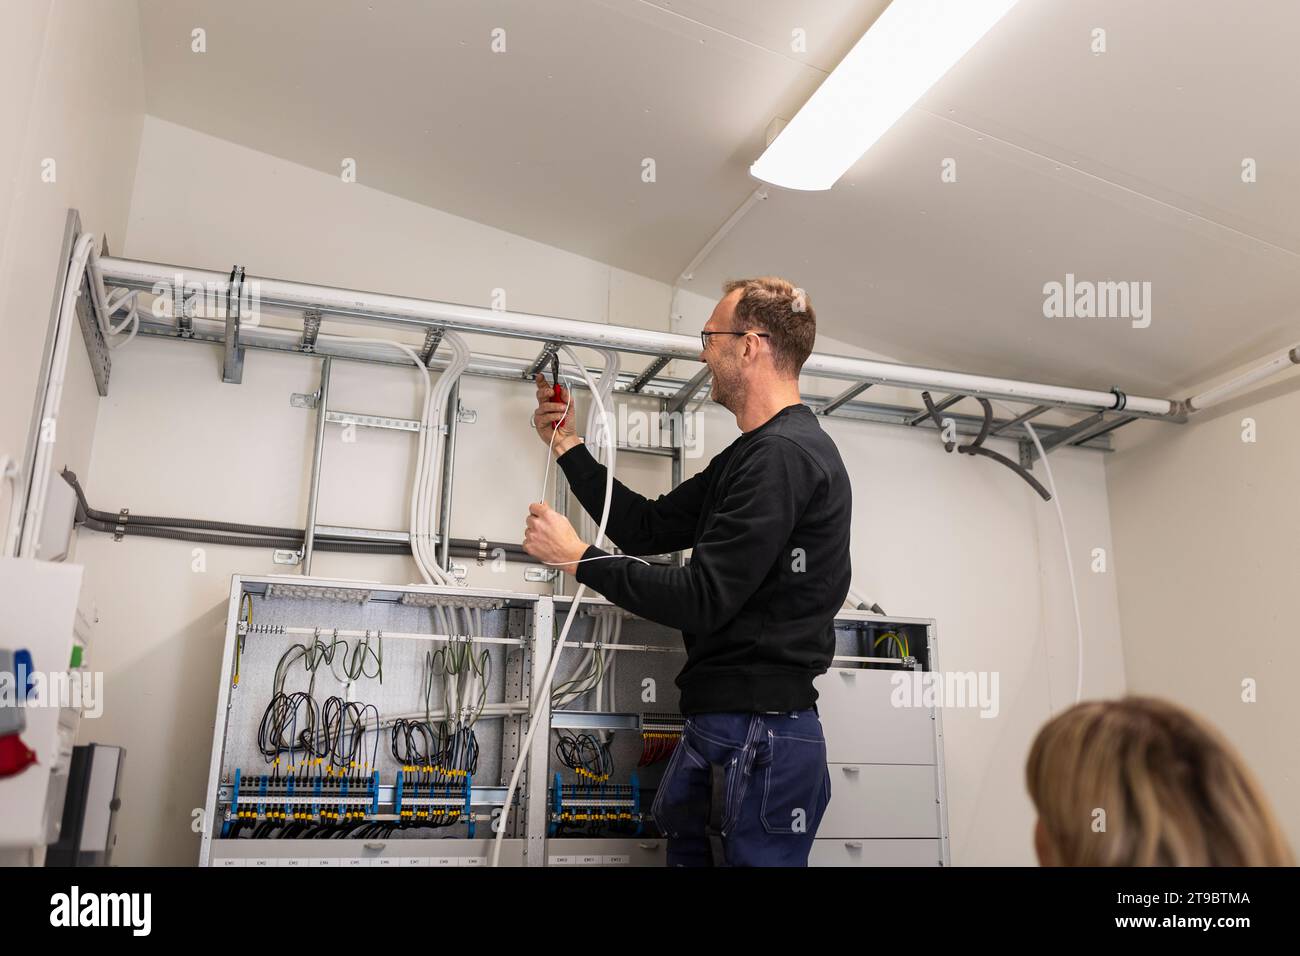 Male technician fixing cable wires on ladder in meter room Stock Photo